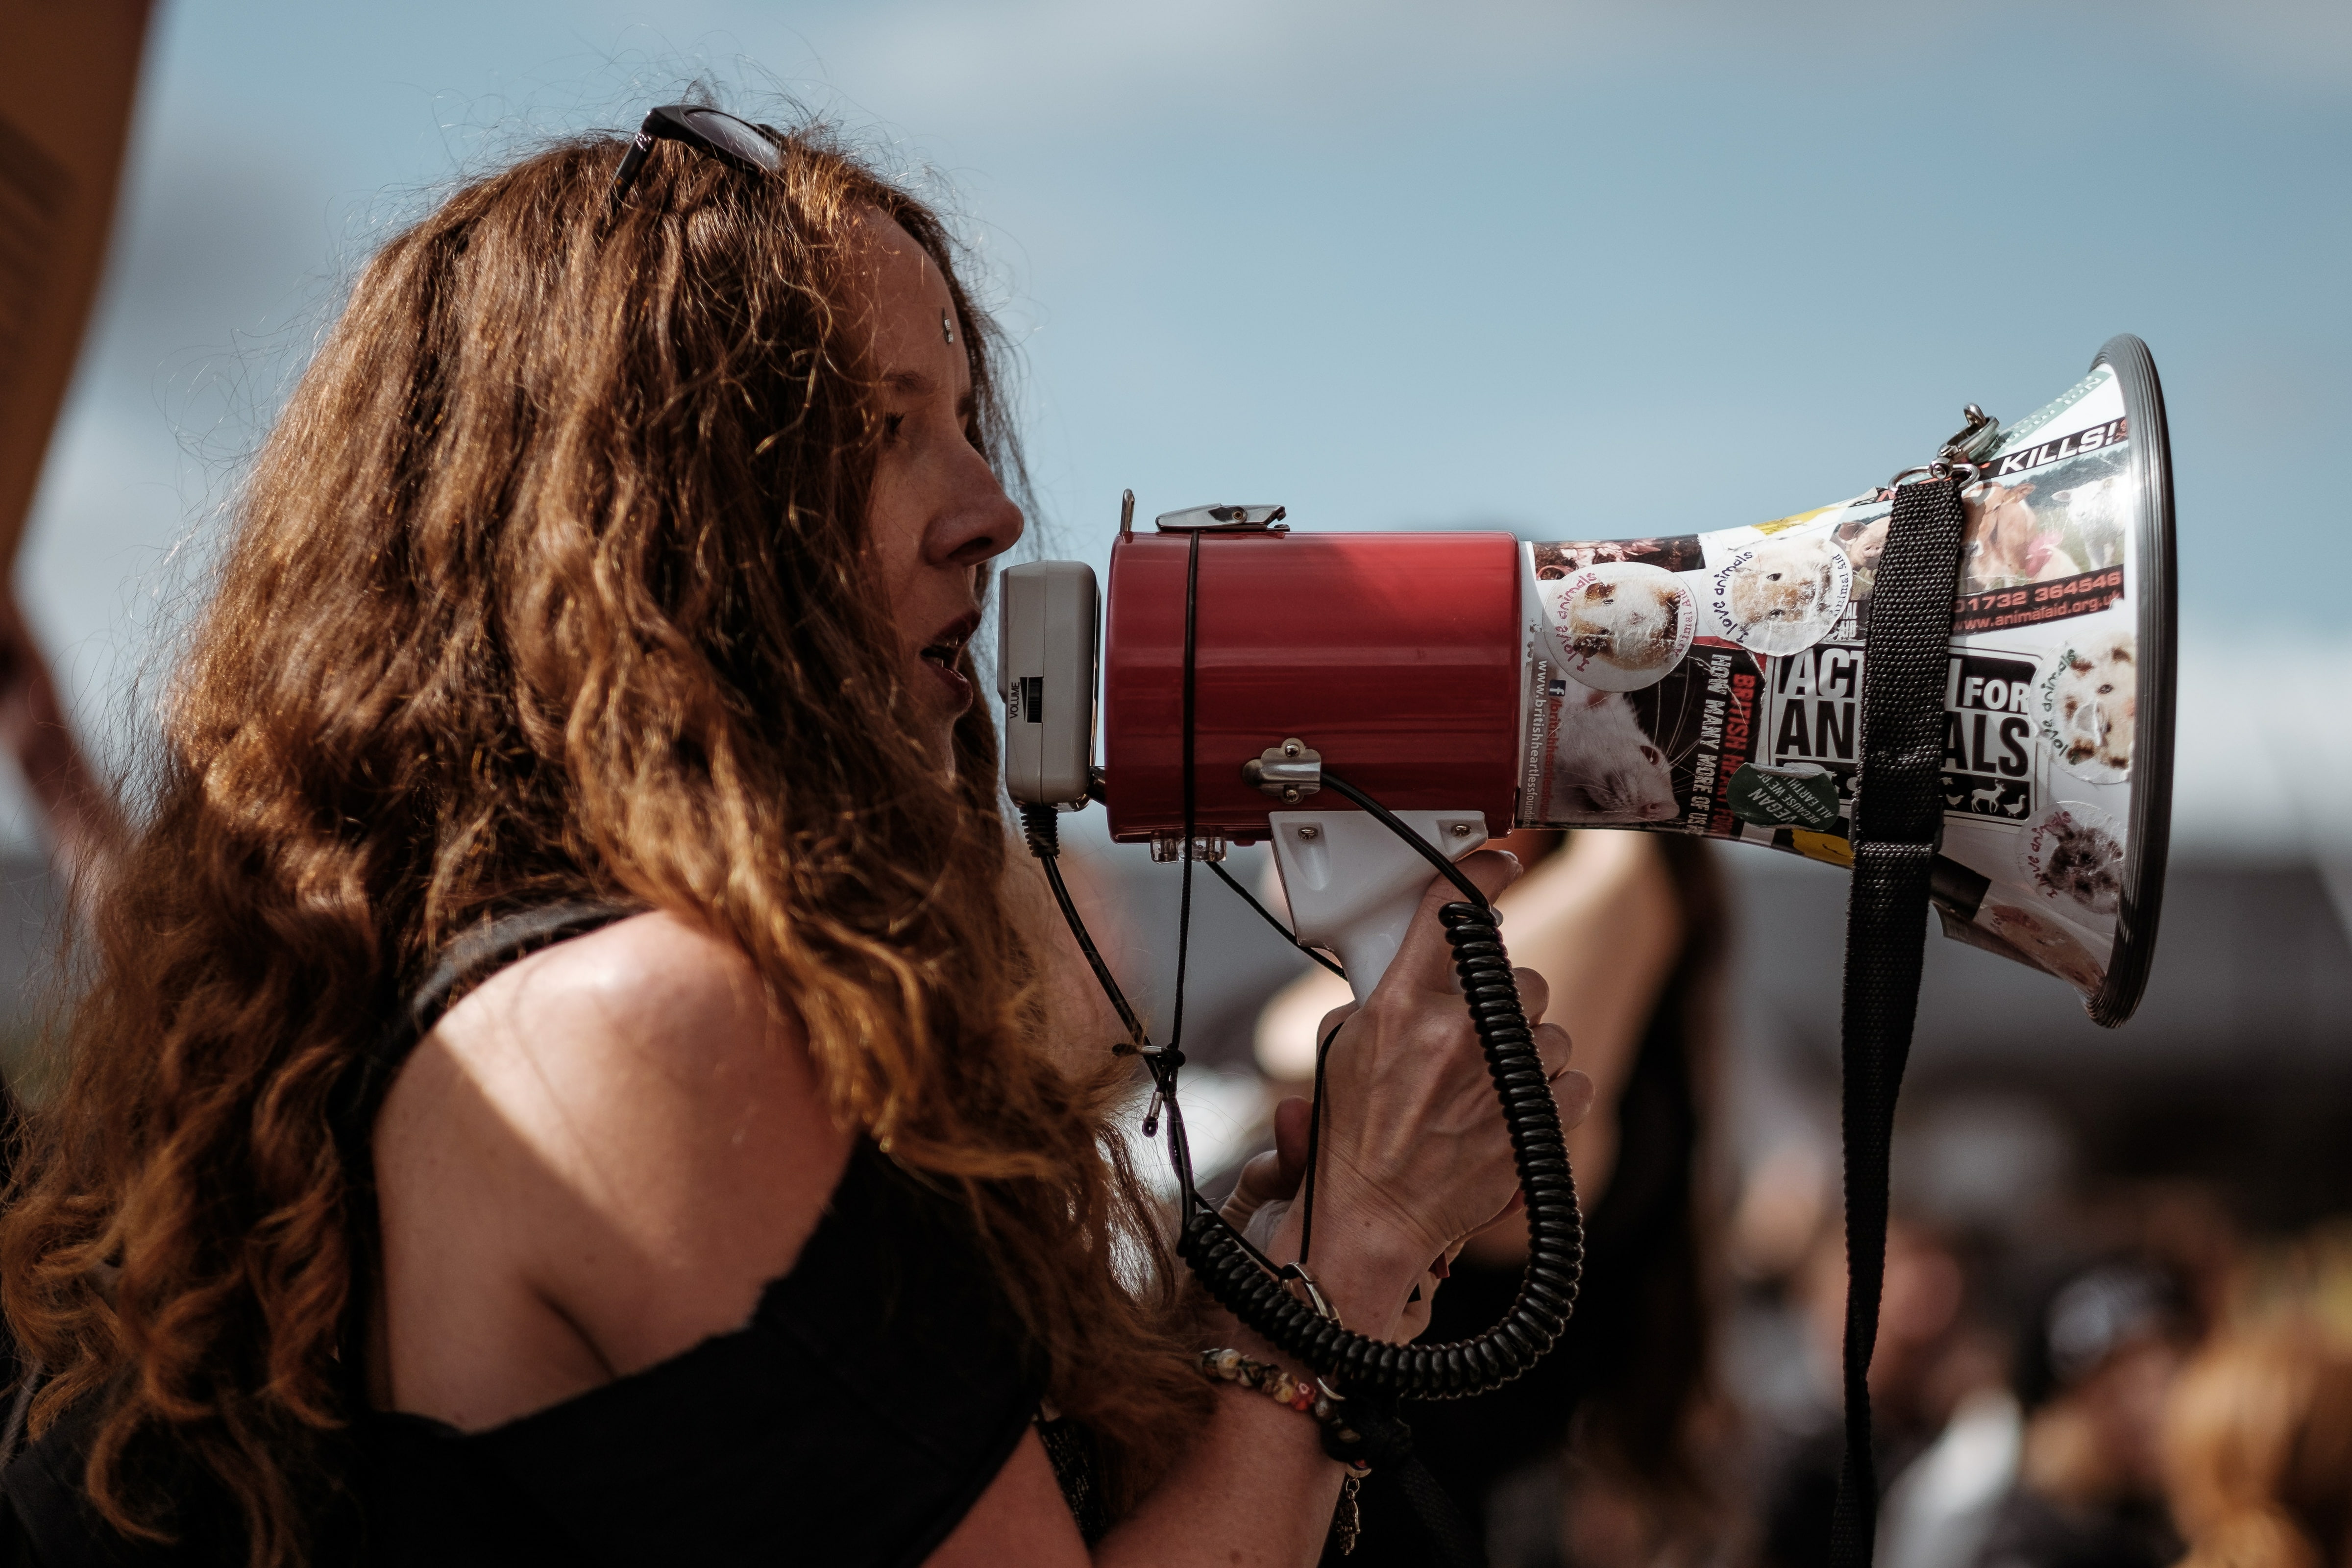 Activist with curly brown hair holding a megaphone covered in stickers.